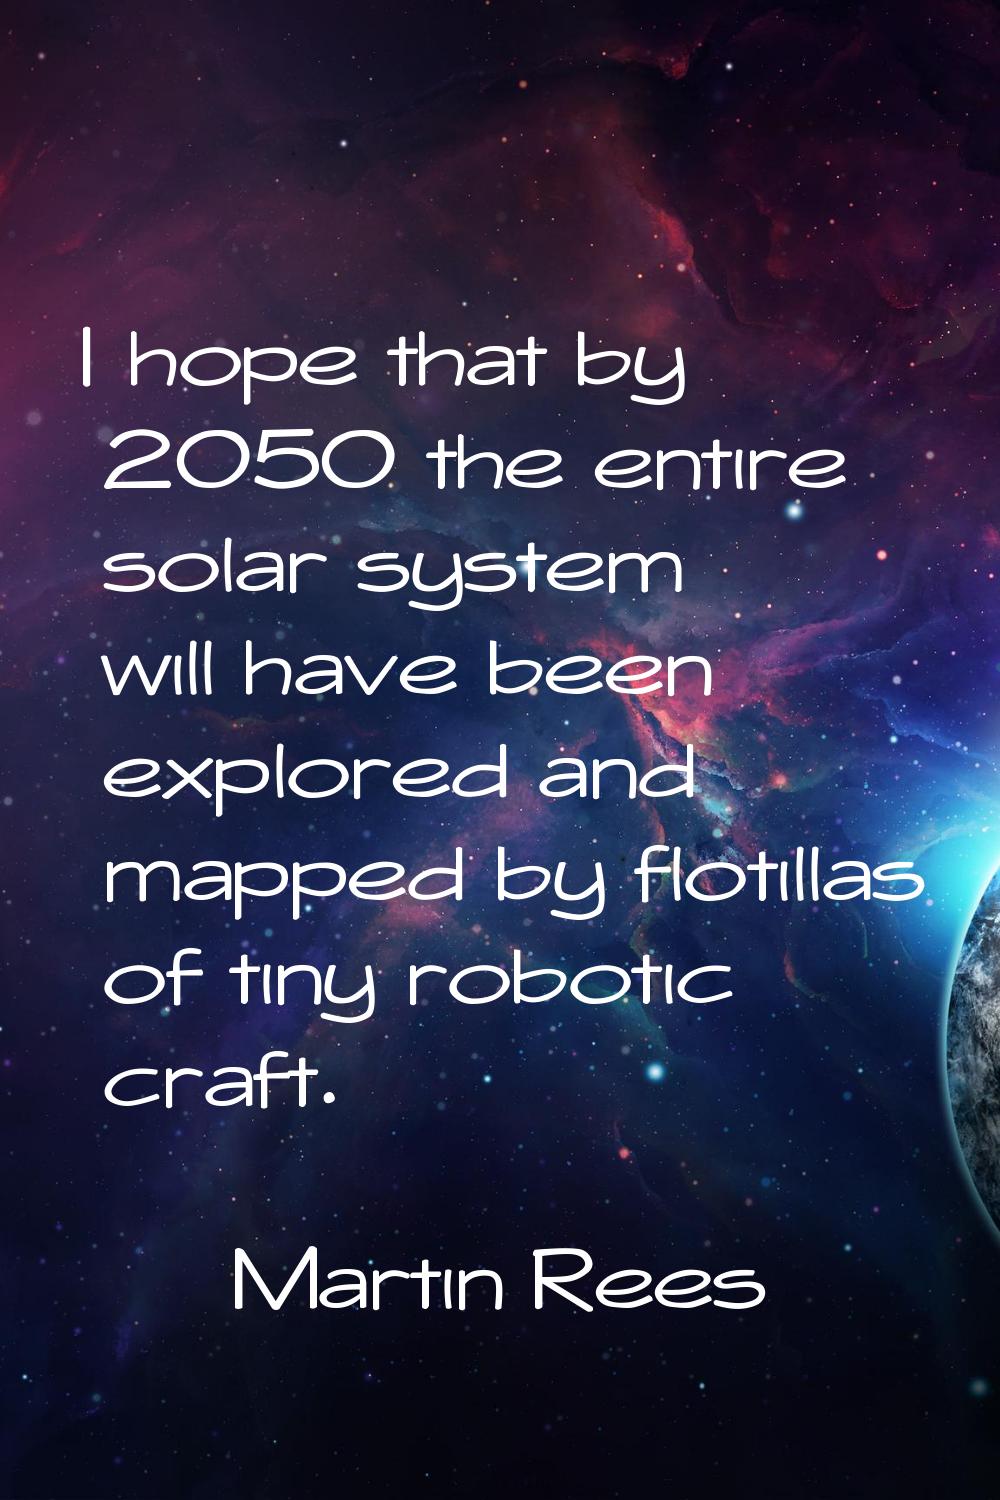 I hope that by 2050 the entire solar system will have been explored and mapped by flotillas of tiny